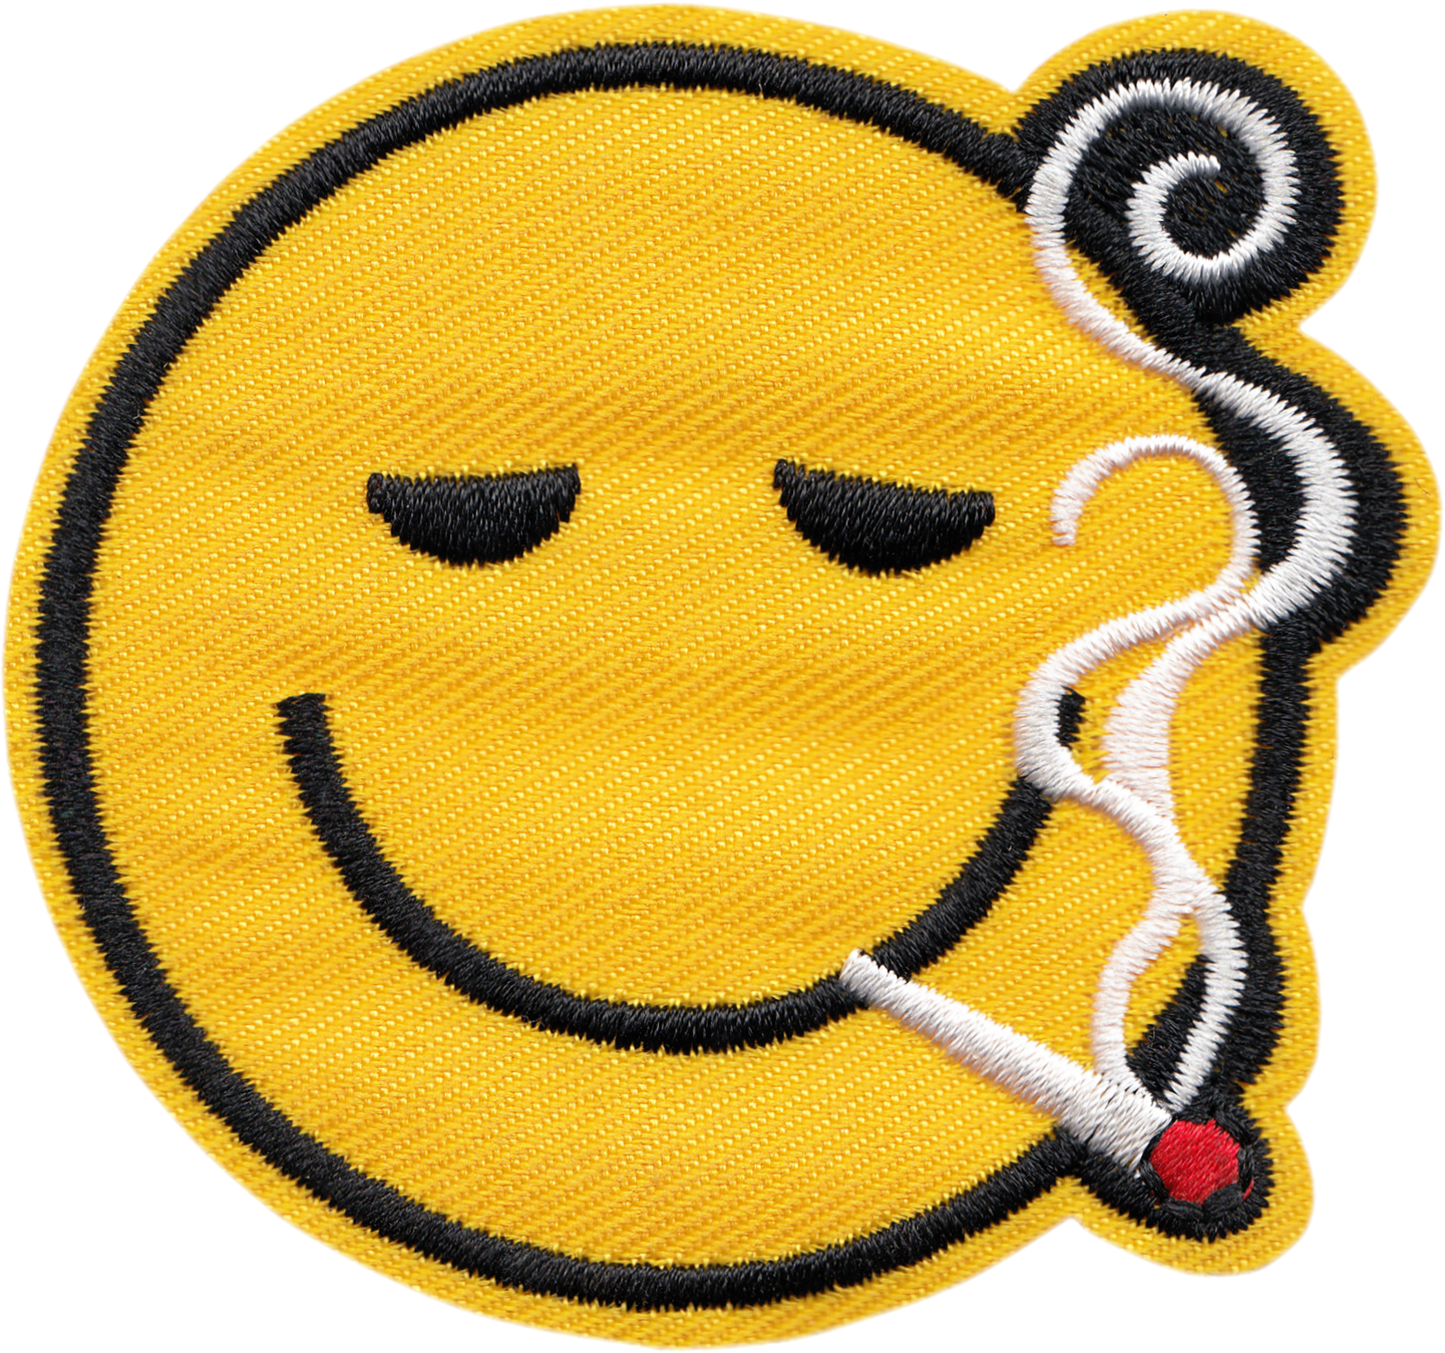 Patch - Happy Face - Smoking